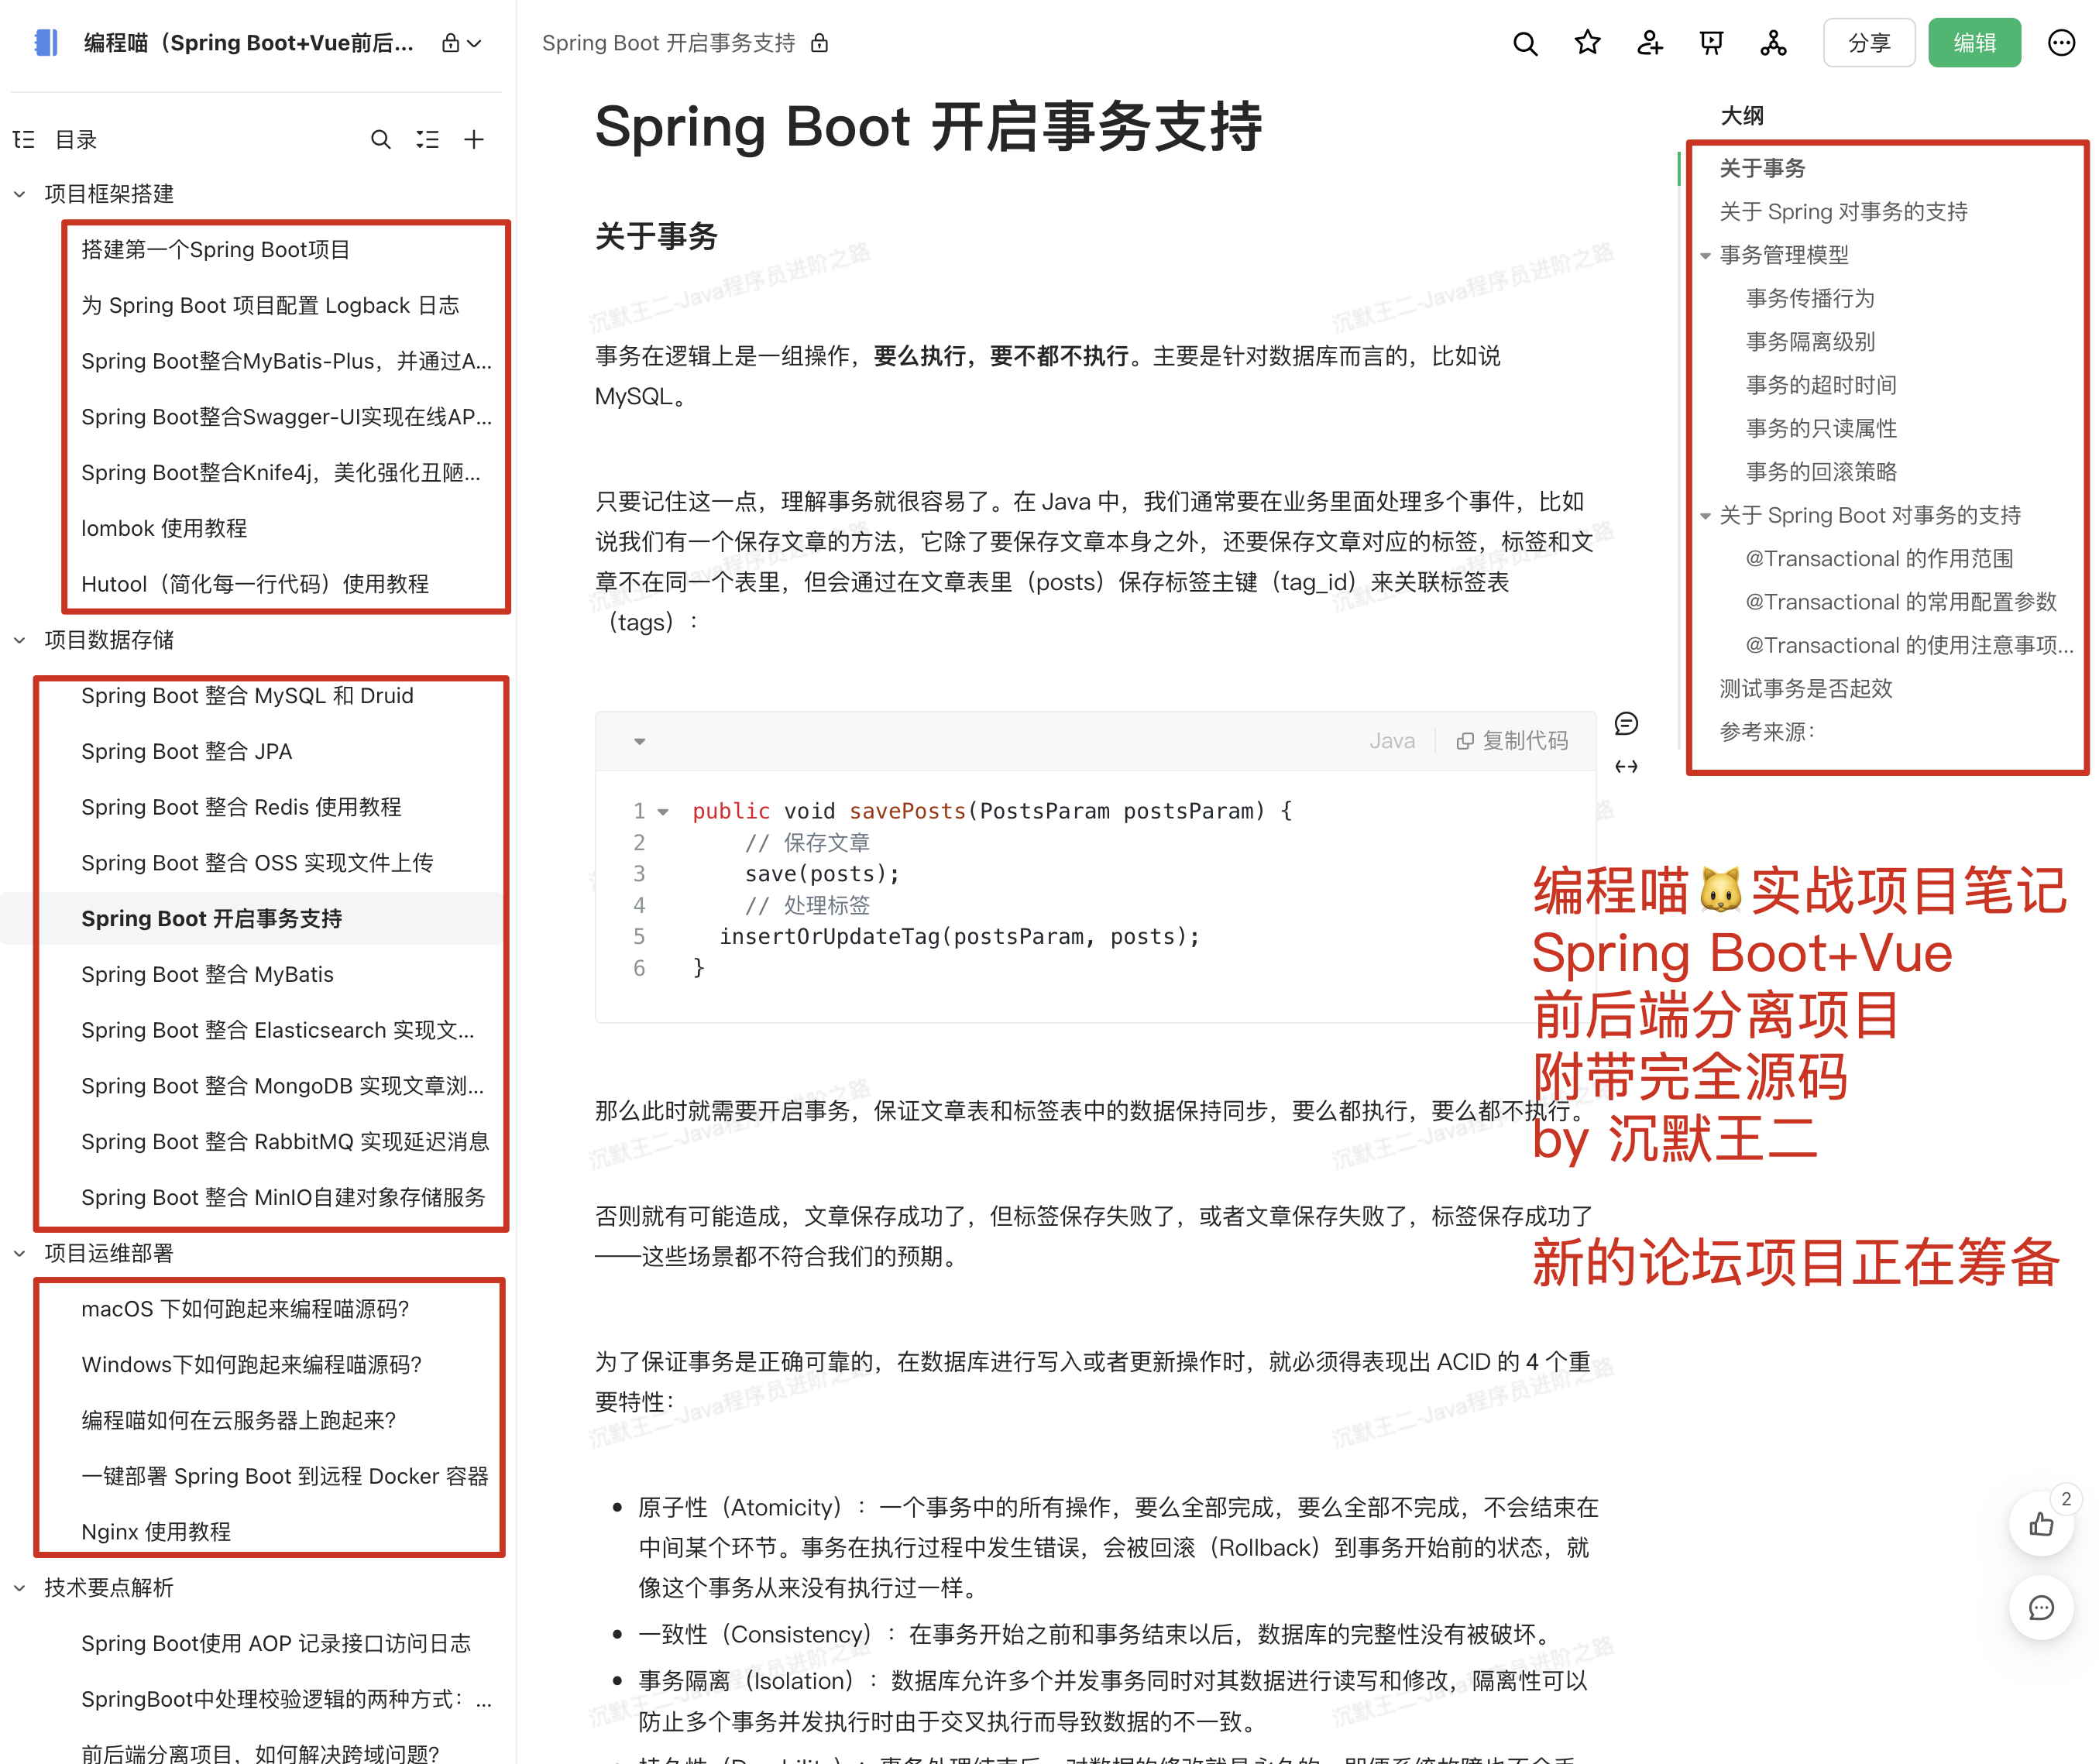 images/nice-article/weixin-gongsxlygtsbtransactionalswzxyydlhcq-853616ff-76bd-40f6-9261-5e45285d3d56.png